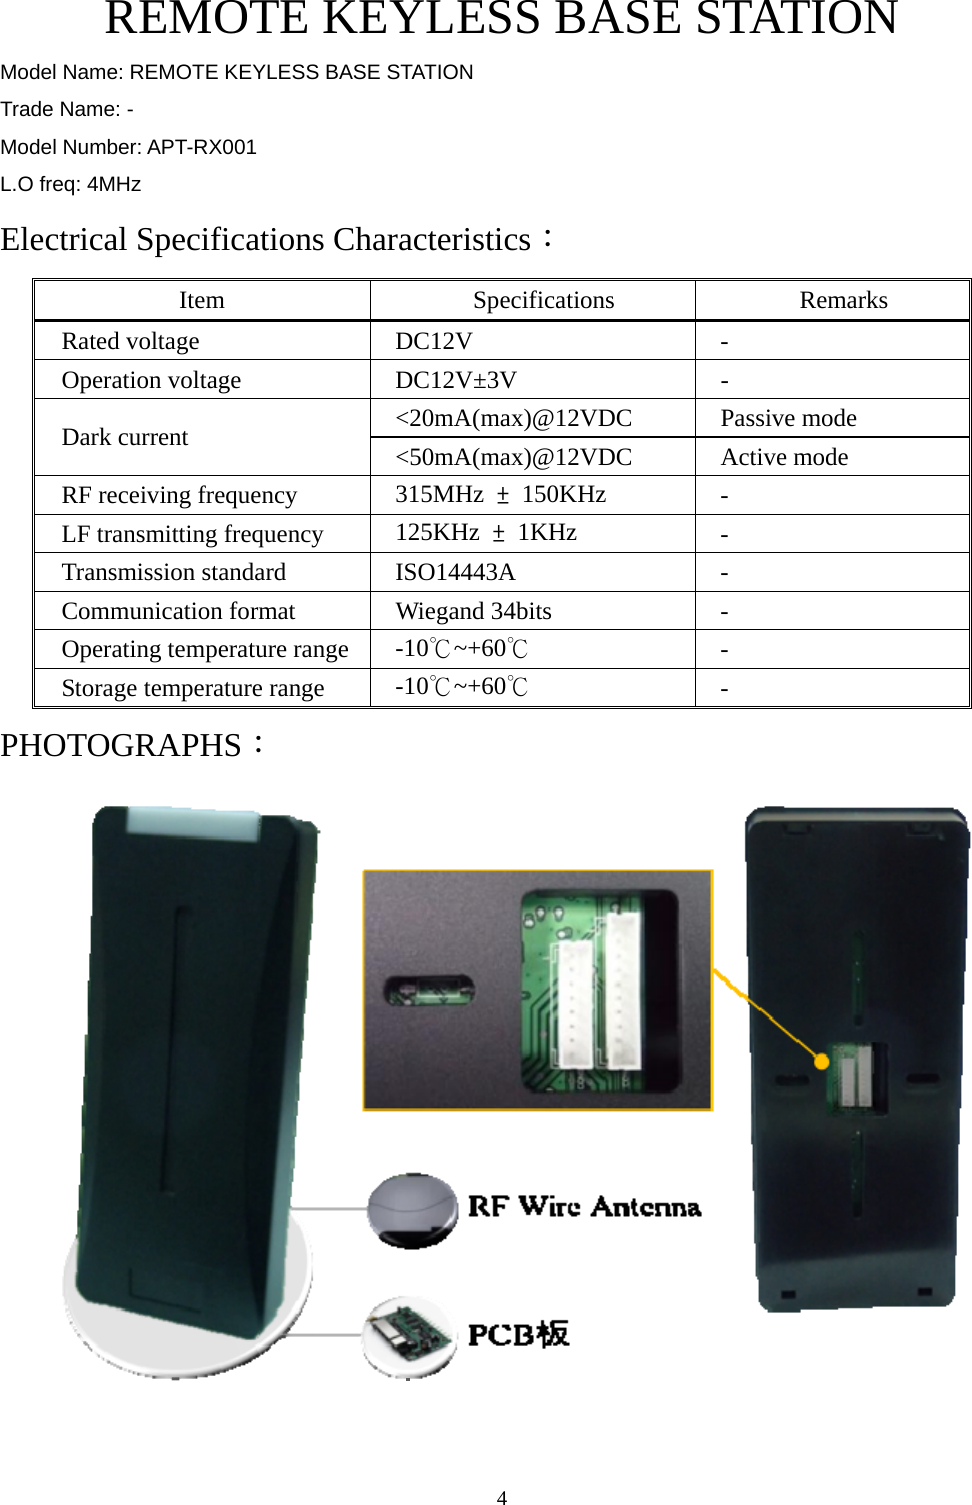  4    REMOTE KEYLESS BASE STATION Model Name: REMOTE KEYLESS BASE STATION Trade Name: - Model Number: APT-RX001 L.O freq: 4MHz Electrical Specifications Characteristics： Item Specifications Remarks Rated voltage  DC12V  - Operation voltage  DC12V±3V  - &lt;20mA(max)@12VDC Passive mode Dark current  &lt;50mA(max)@12VDC Active mode RF receiving frequency  315MHz  ± 150KHz  - LF transmitting frequency  125KHz  ± 1KHz  - Transmission standard  ISO14443A  - Communication format  Wiegand 34bits  - Operating temperature range  -10℃~+60℃ - Storage temperature range  -10℃~+60℃ - PHOTOGRAPHS：  